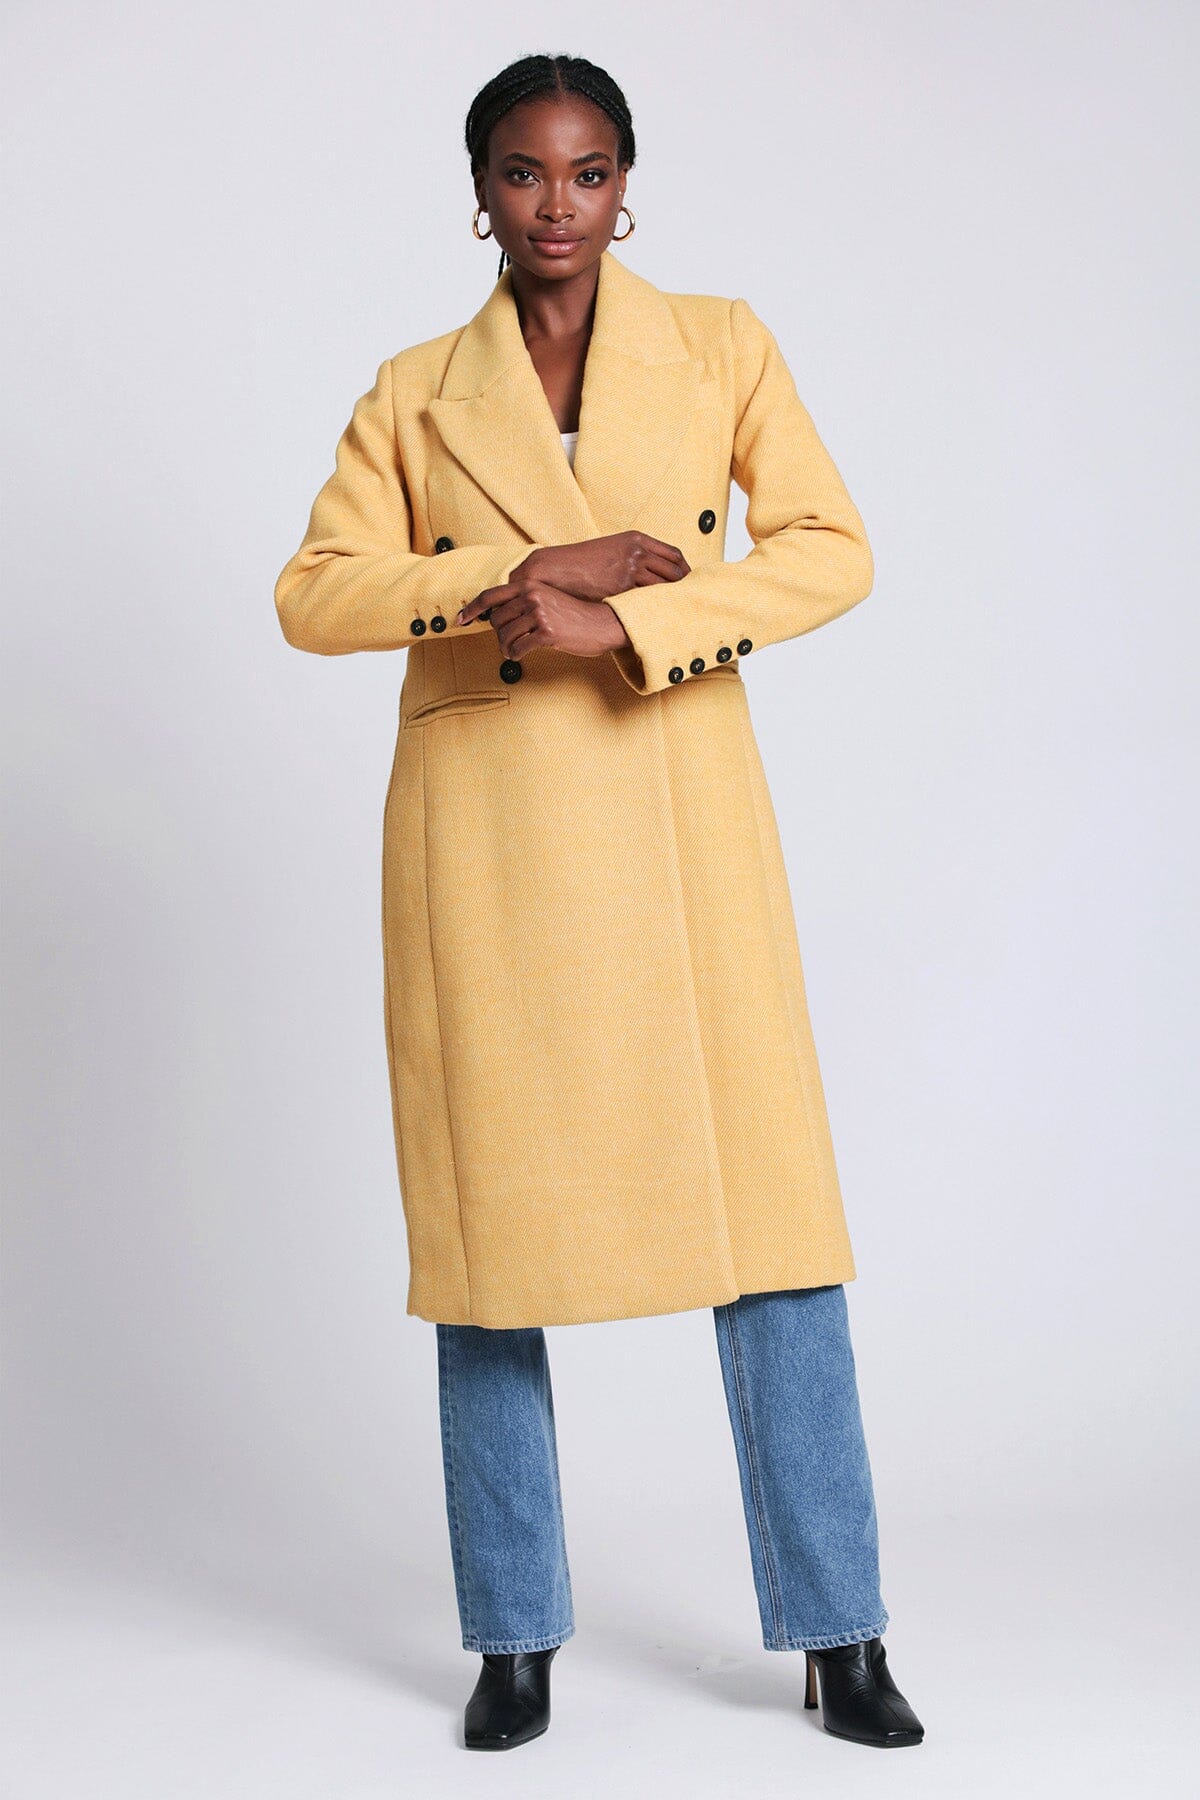 Mustard yellow tailored double-breasted long coat by Avec Les Filles Coats & Jackets